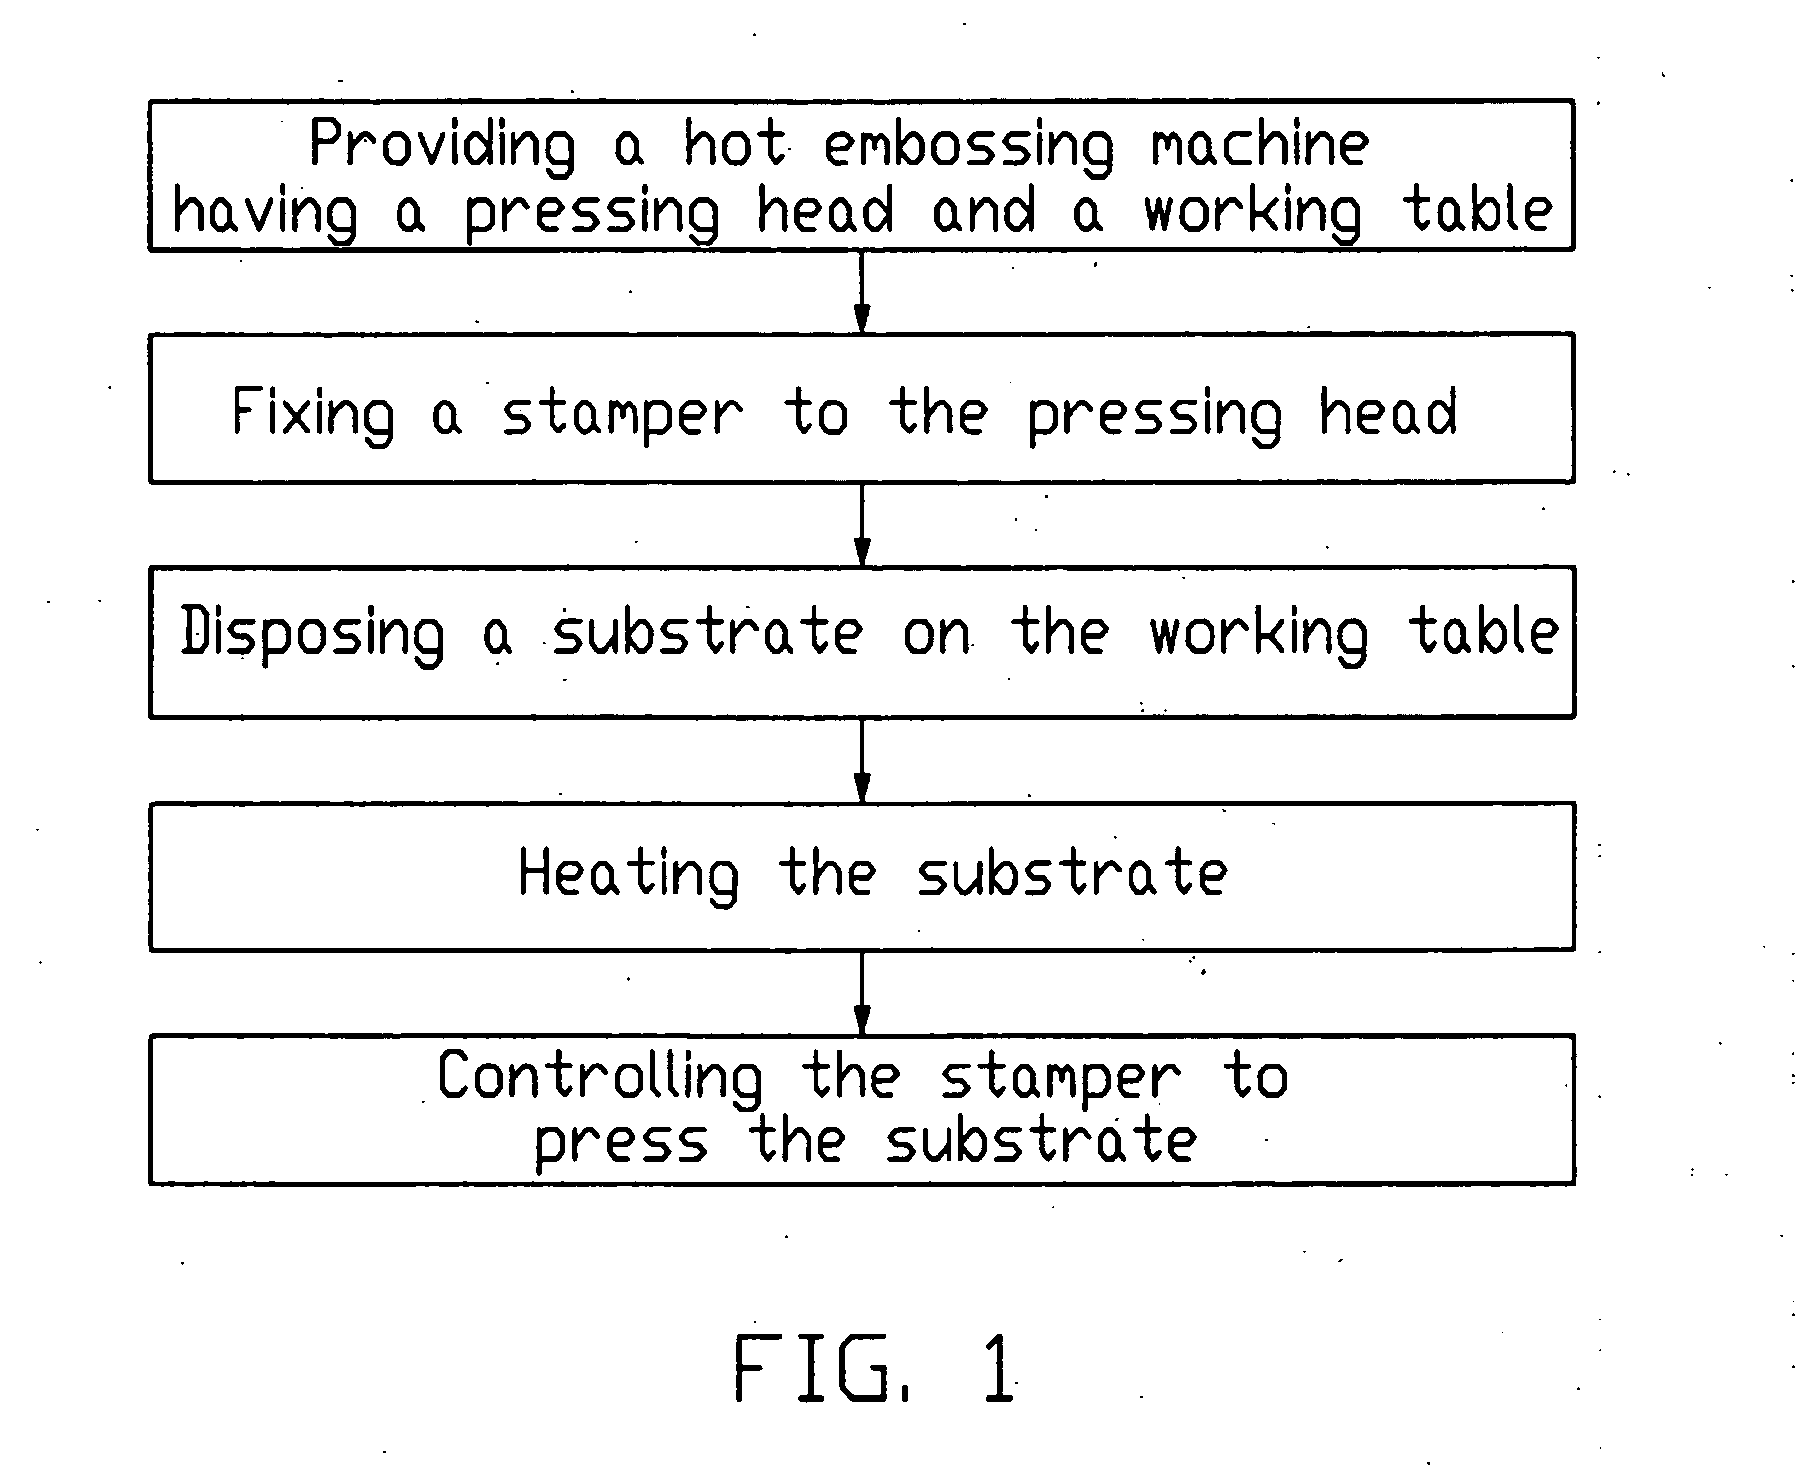 Method for manufacturing a light guide plate having light manipulating microstructures